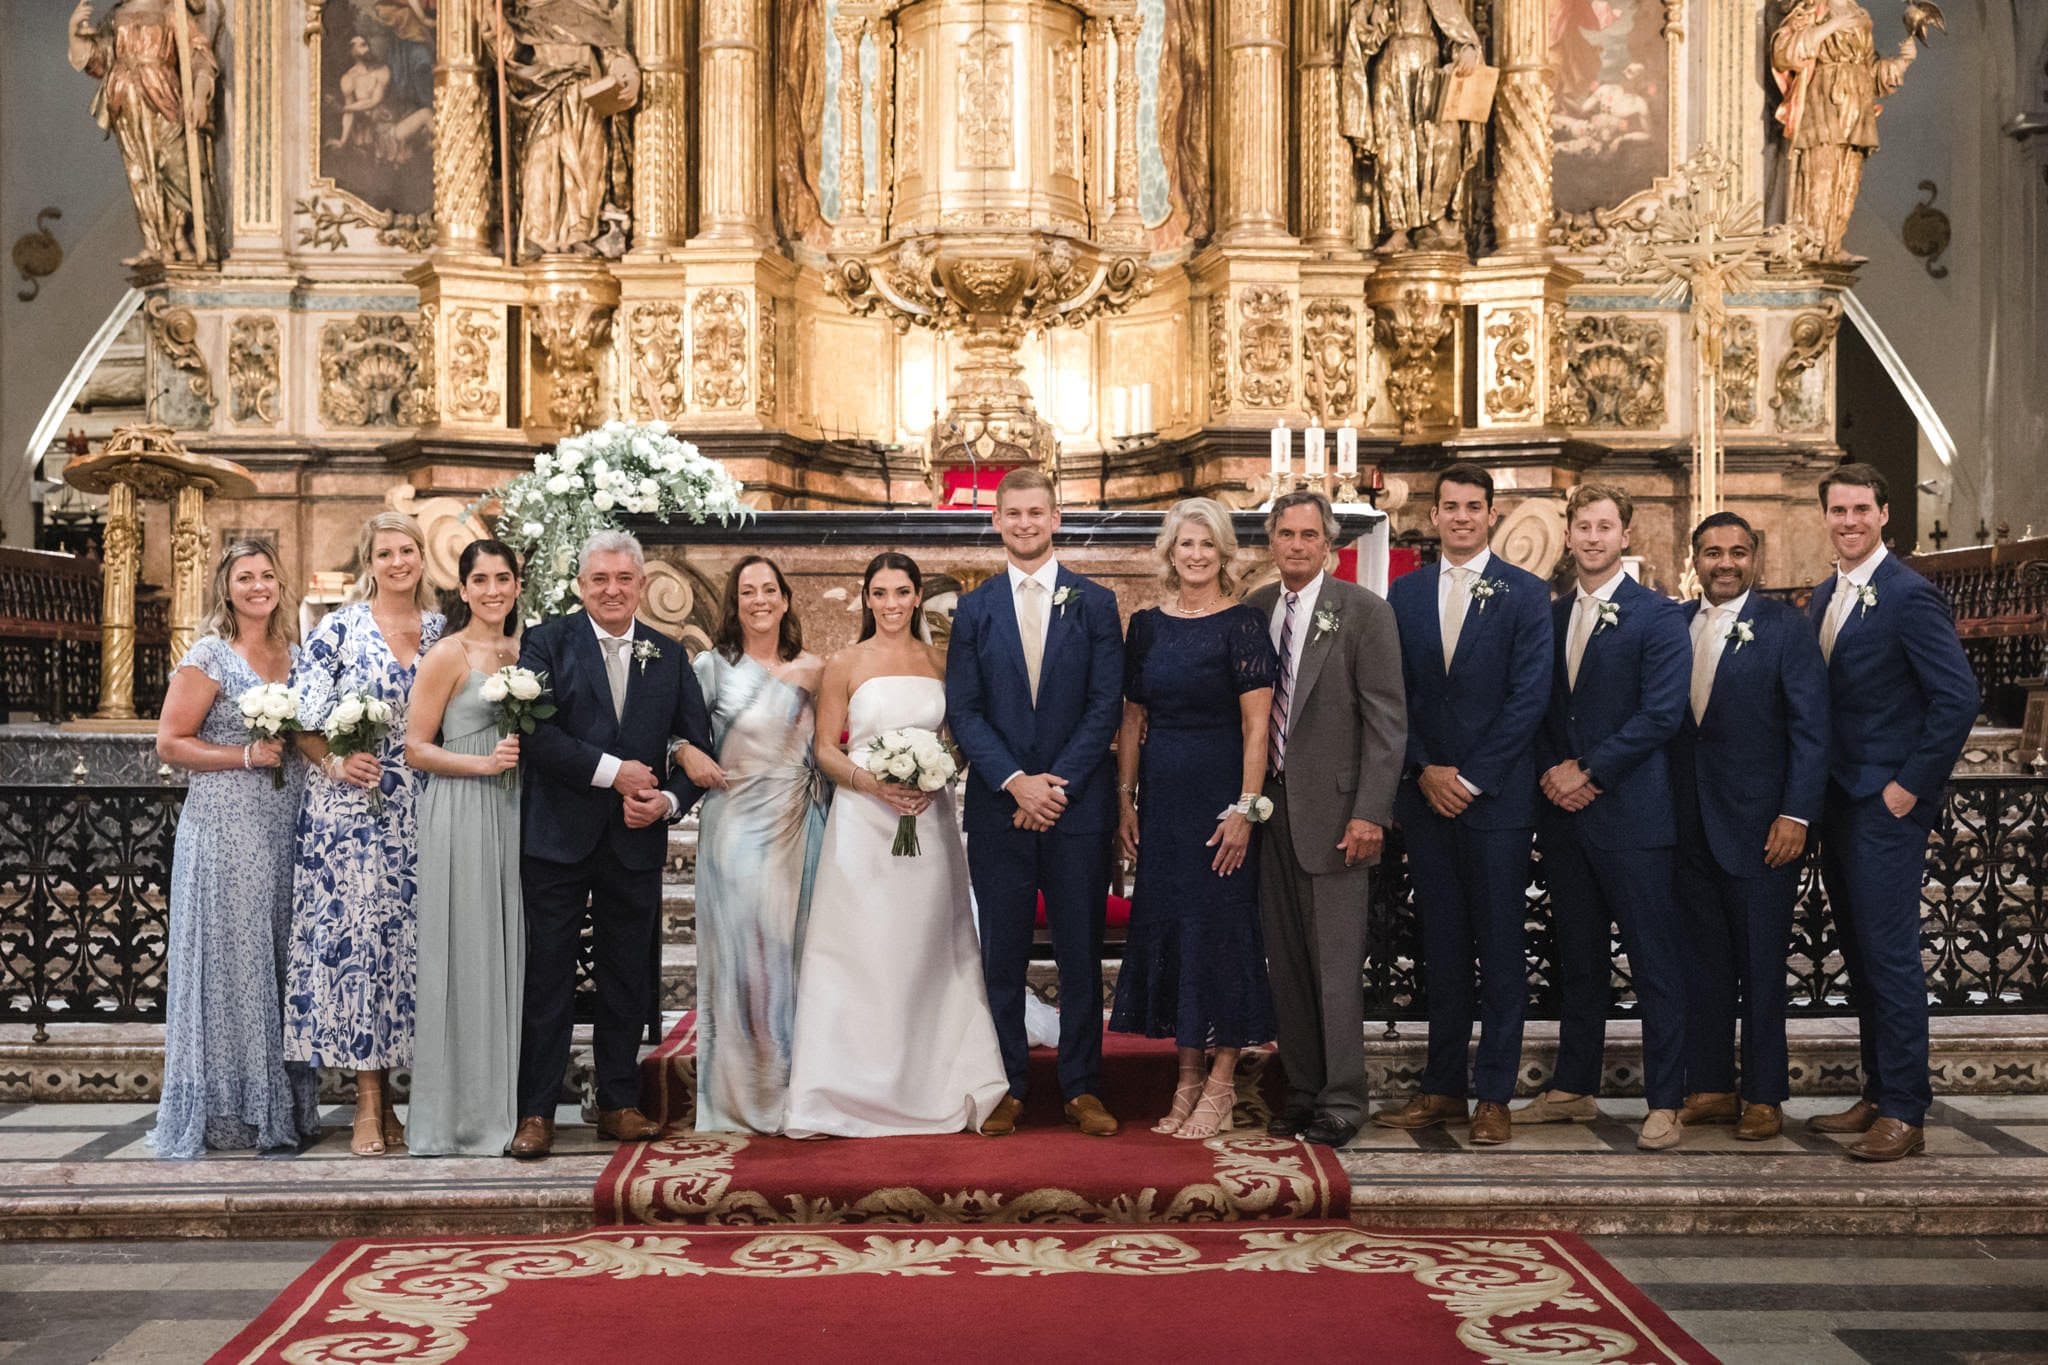 Cristina Meneses and Ryan Aceto pose with their family at their wedding in Spain